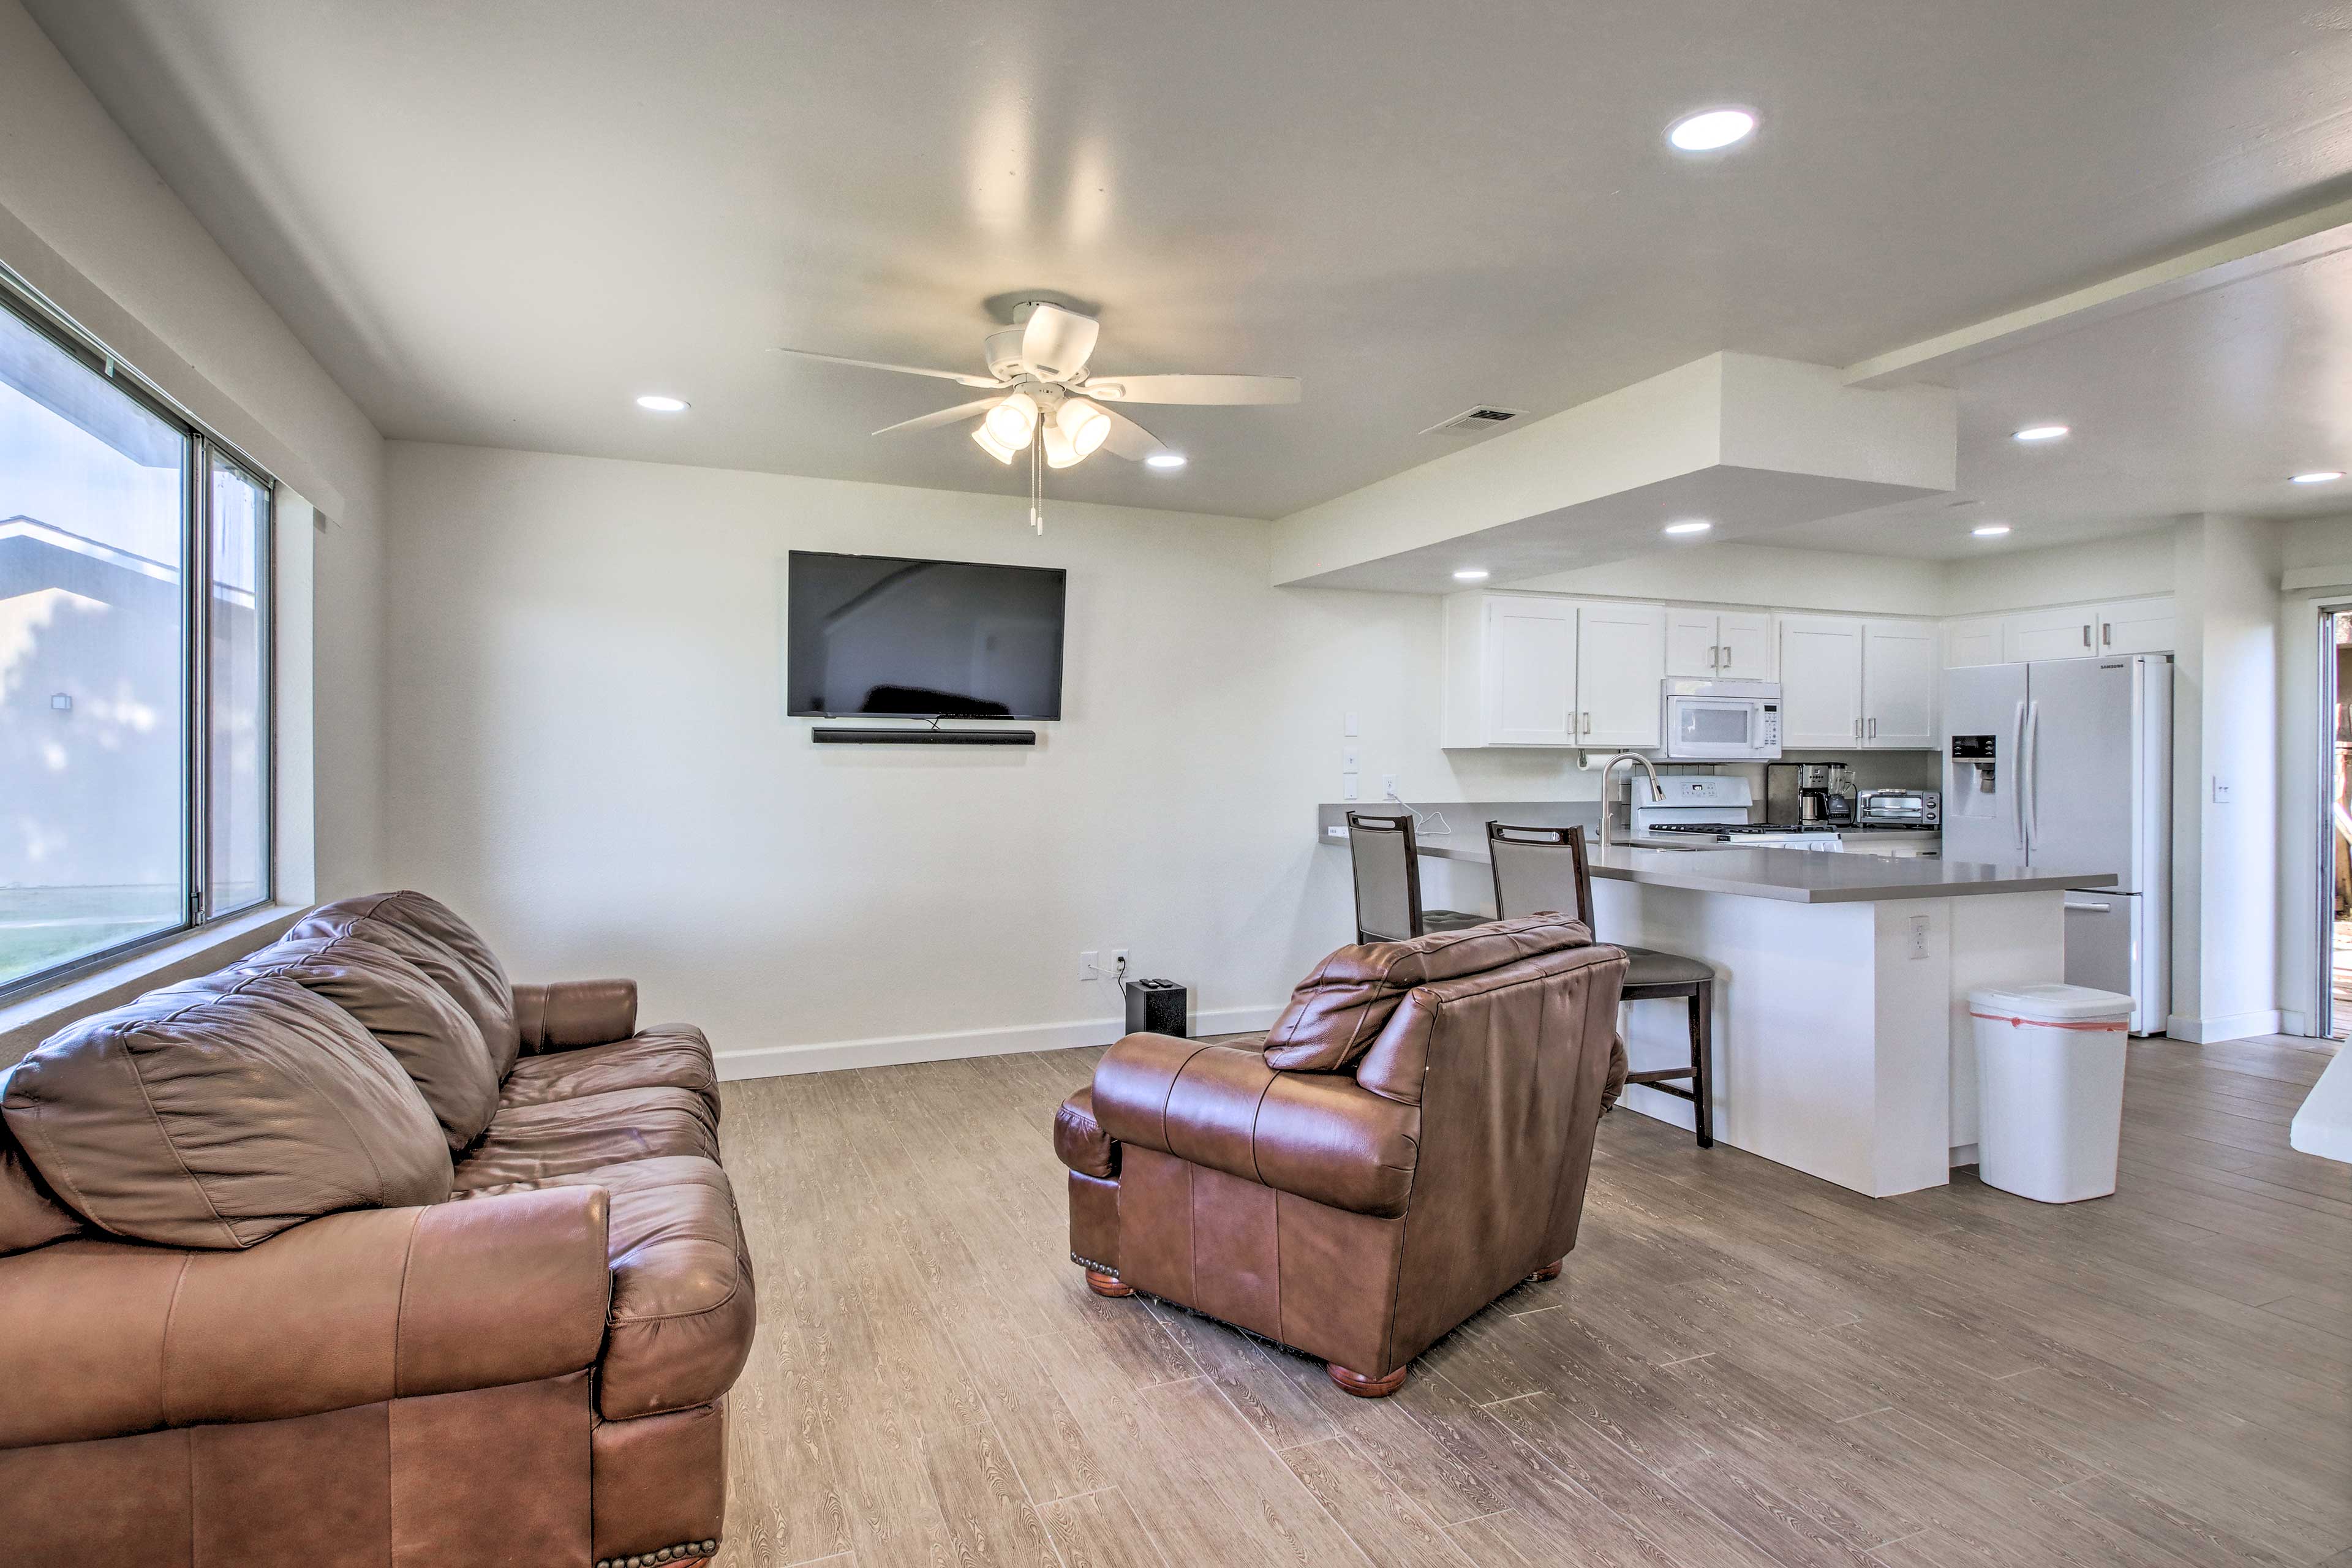 Property Image 2 - Comfy Bakersfield Townhome - Fire Pit & Patio